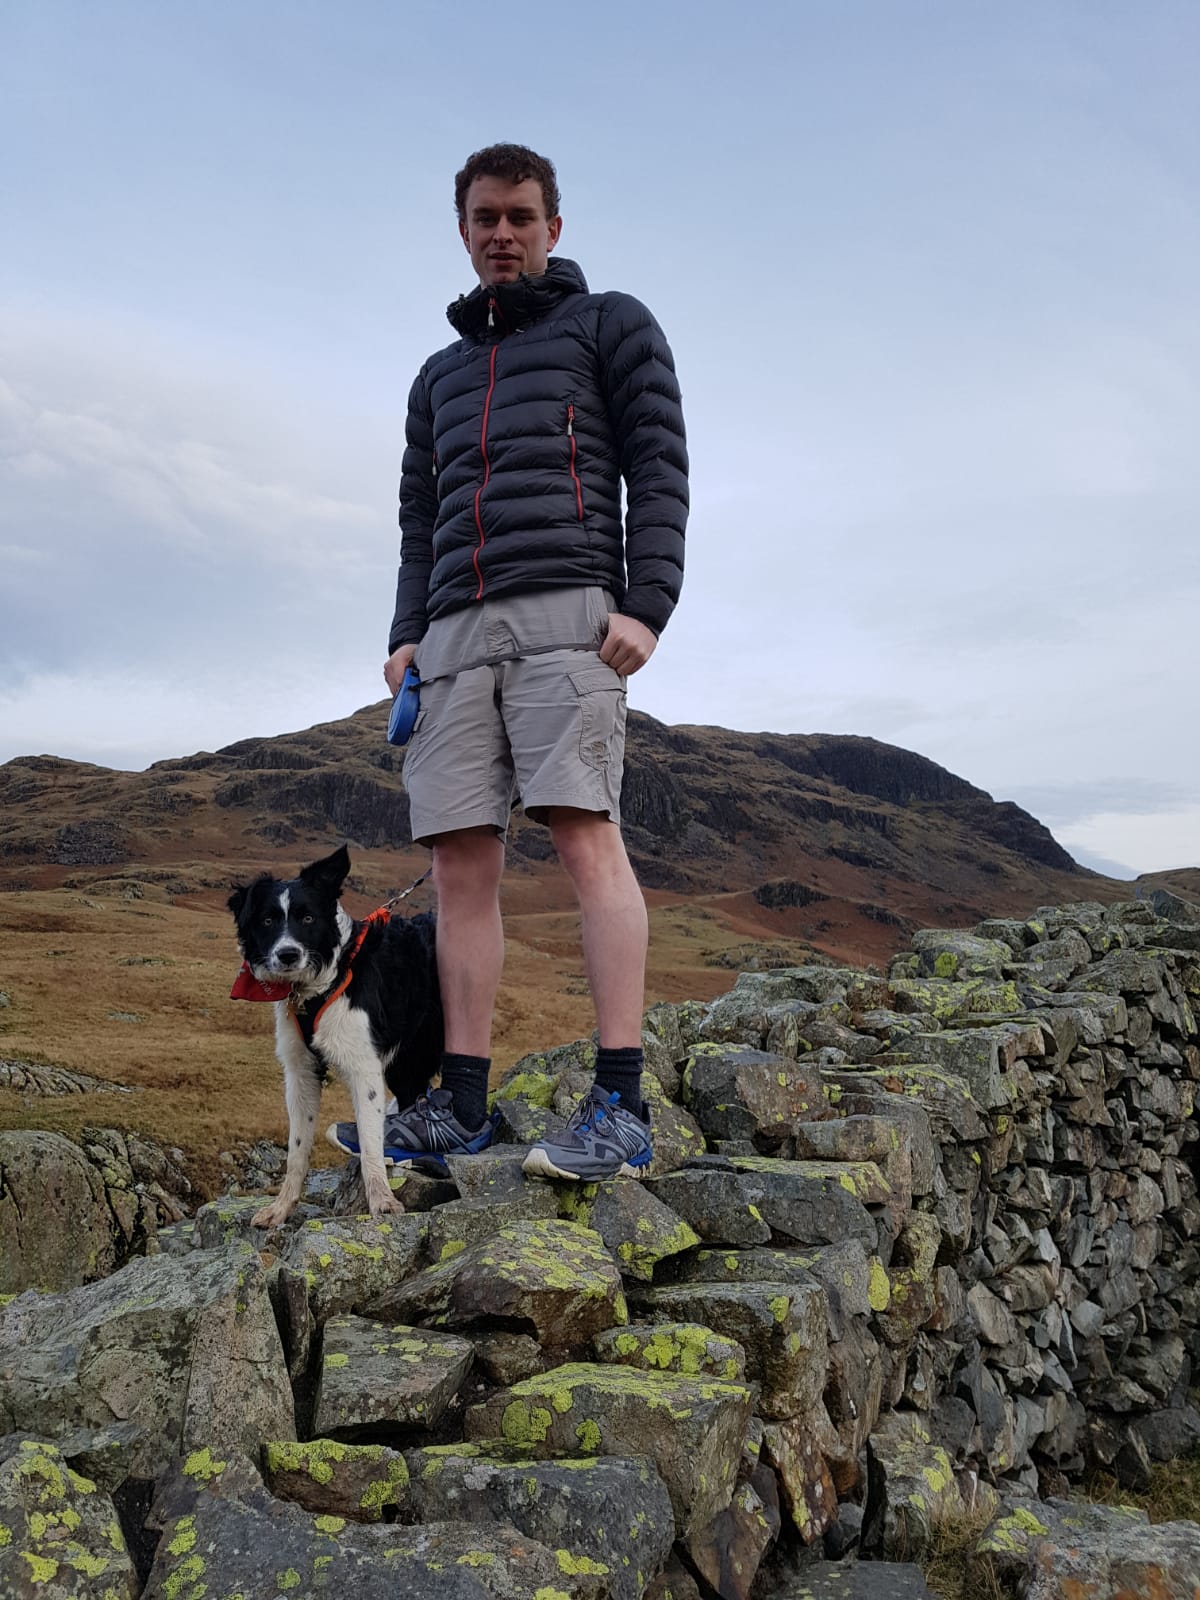 Nicholas Tawn standing on a wall with his dog.